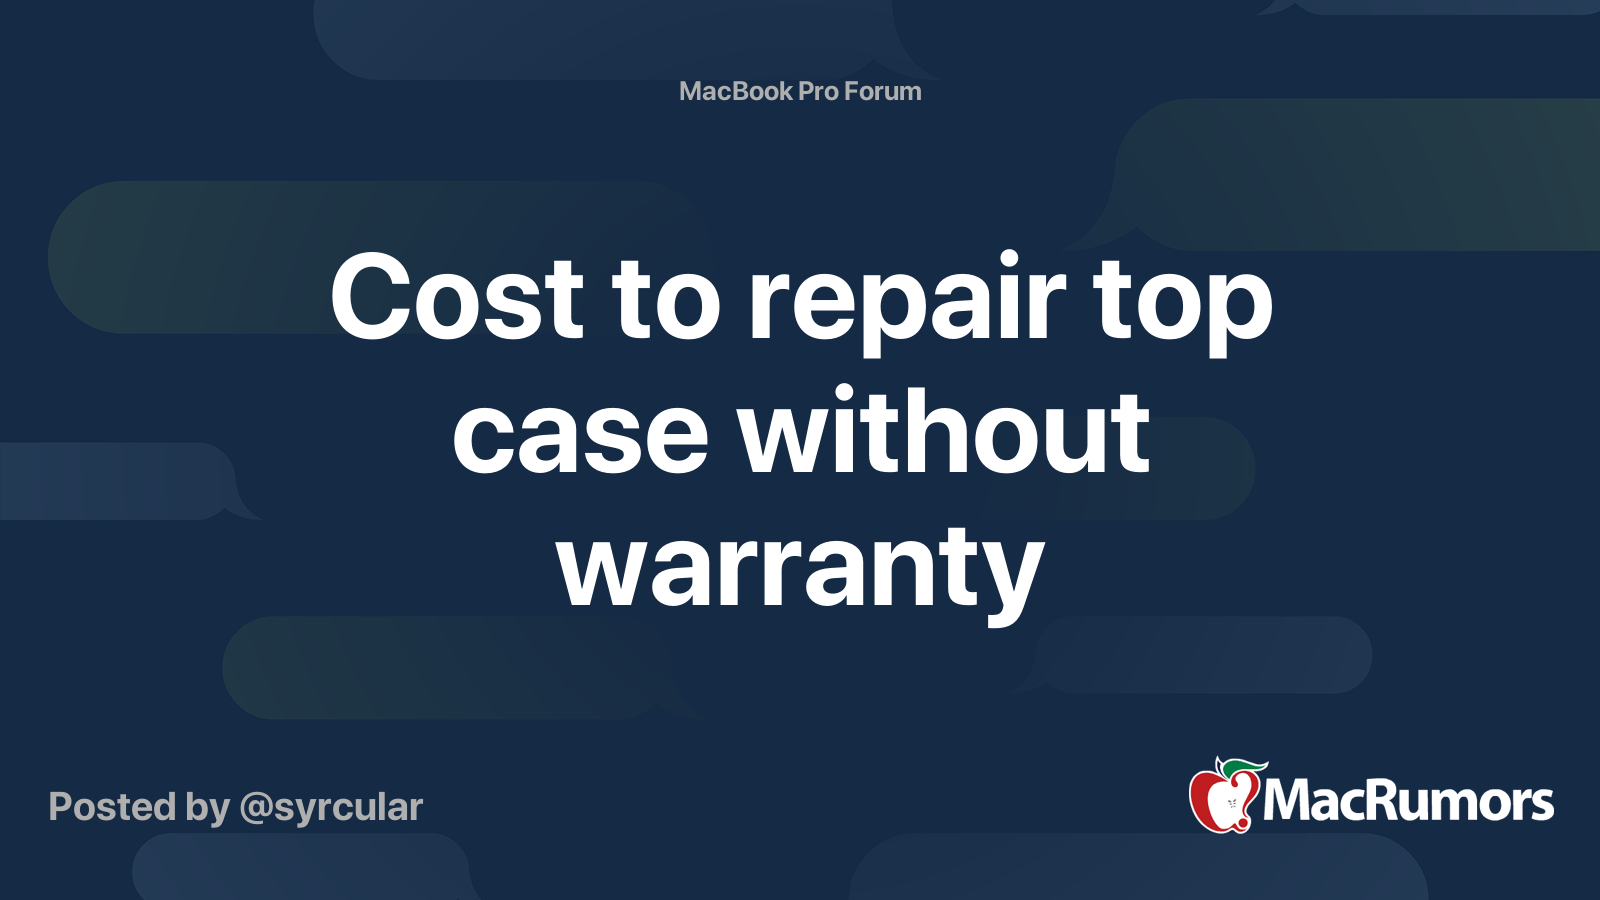 fascisme hente bølge Cost to repair top case without warranty | MacRumors Forums